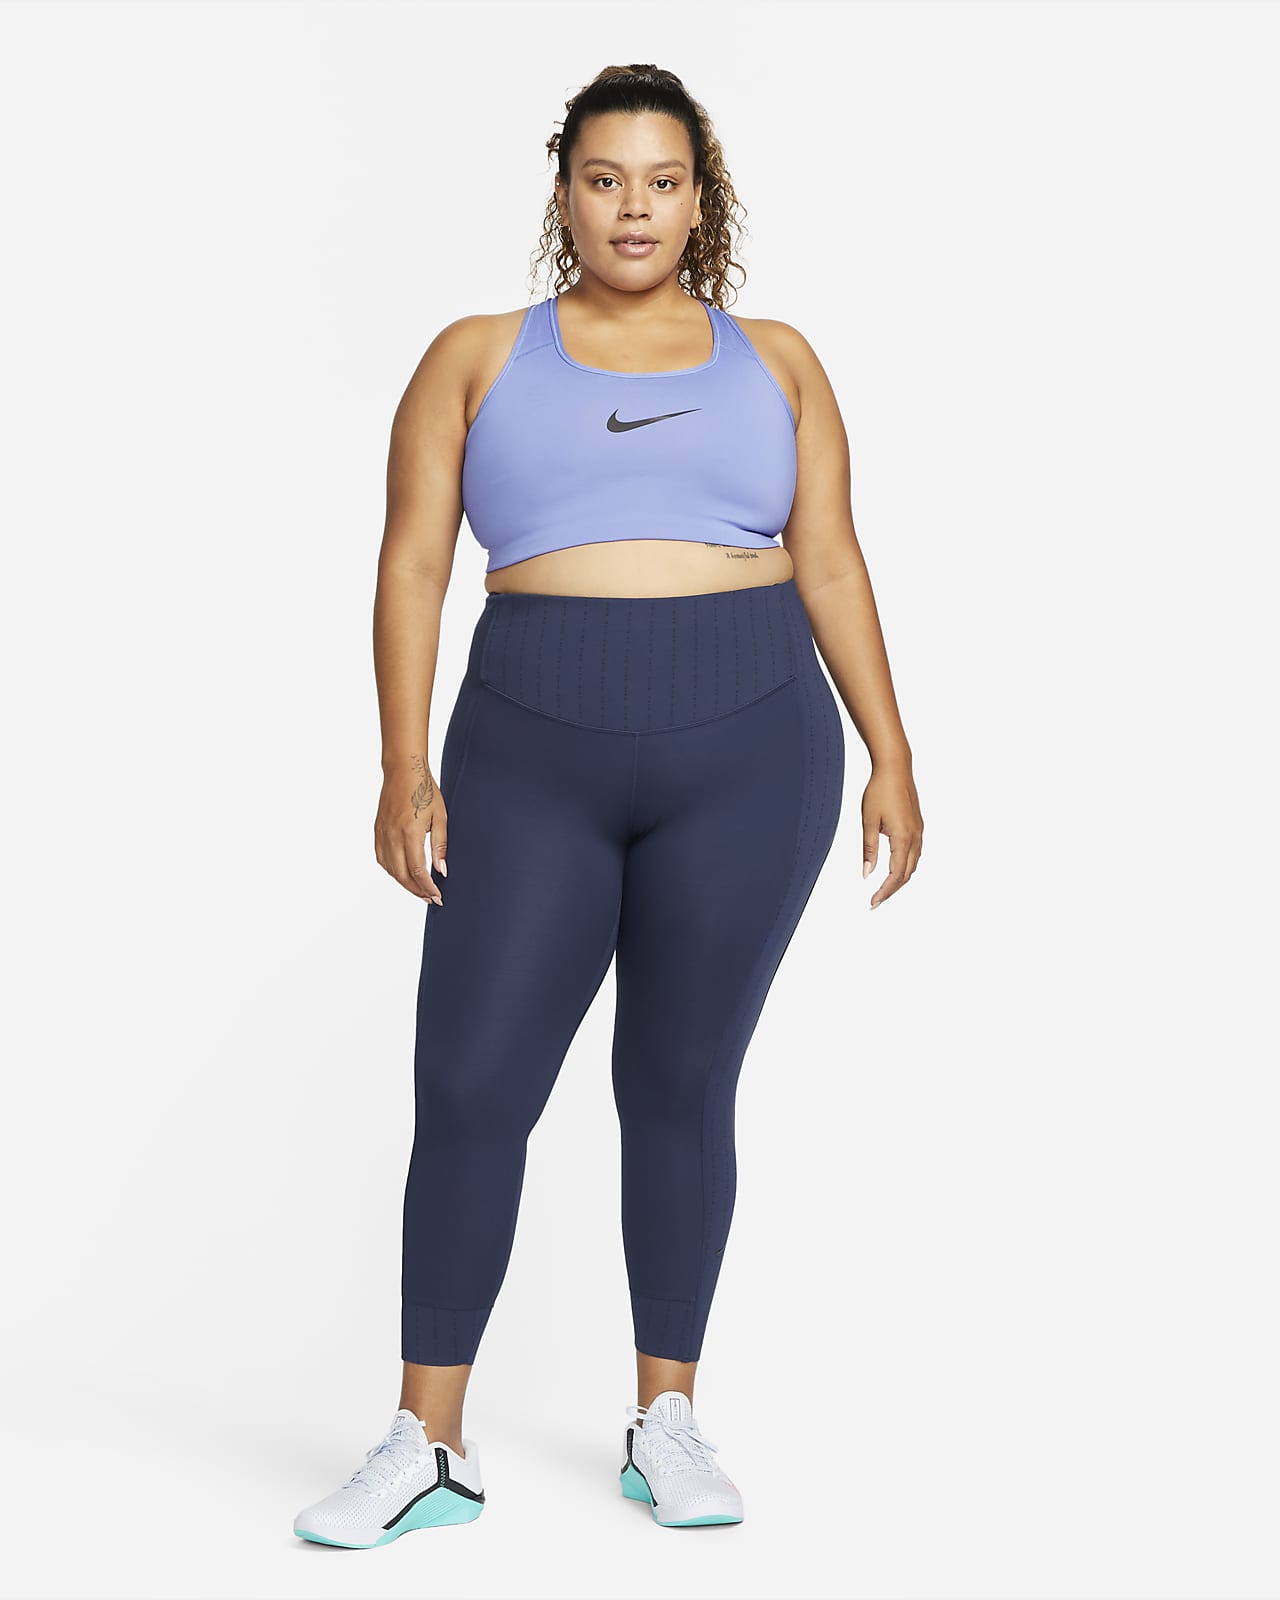 Nike Training Icon Clash one tight Luxe leggings in black